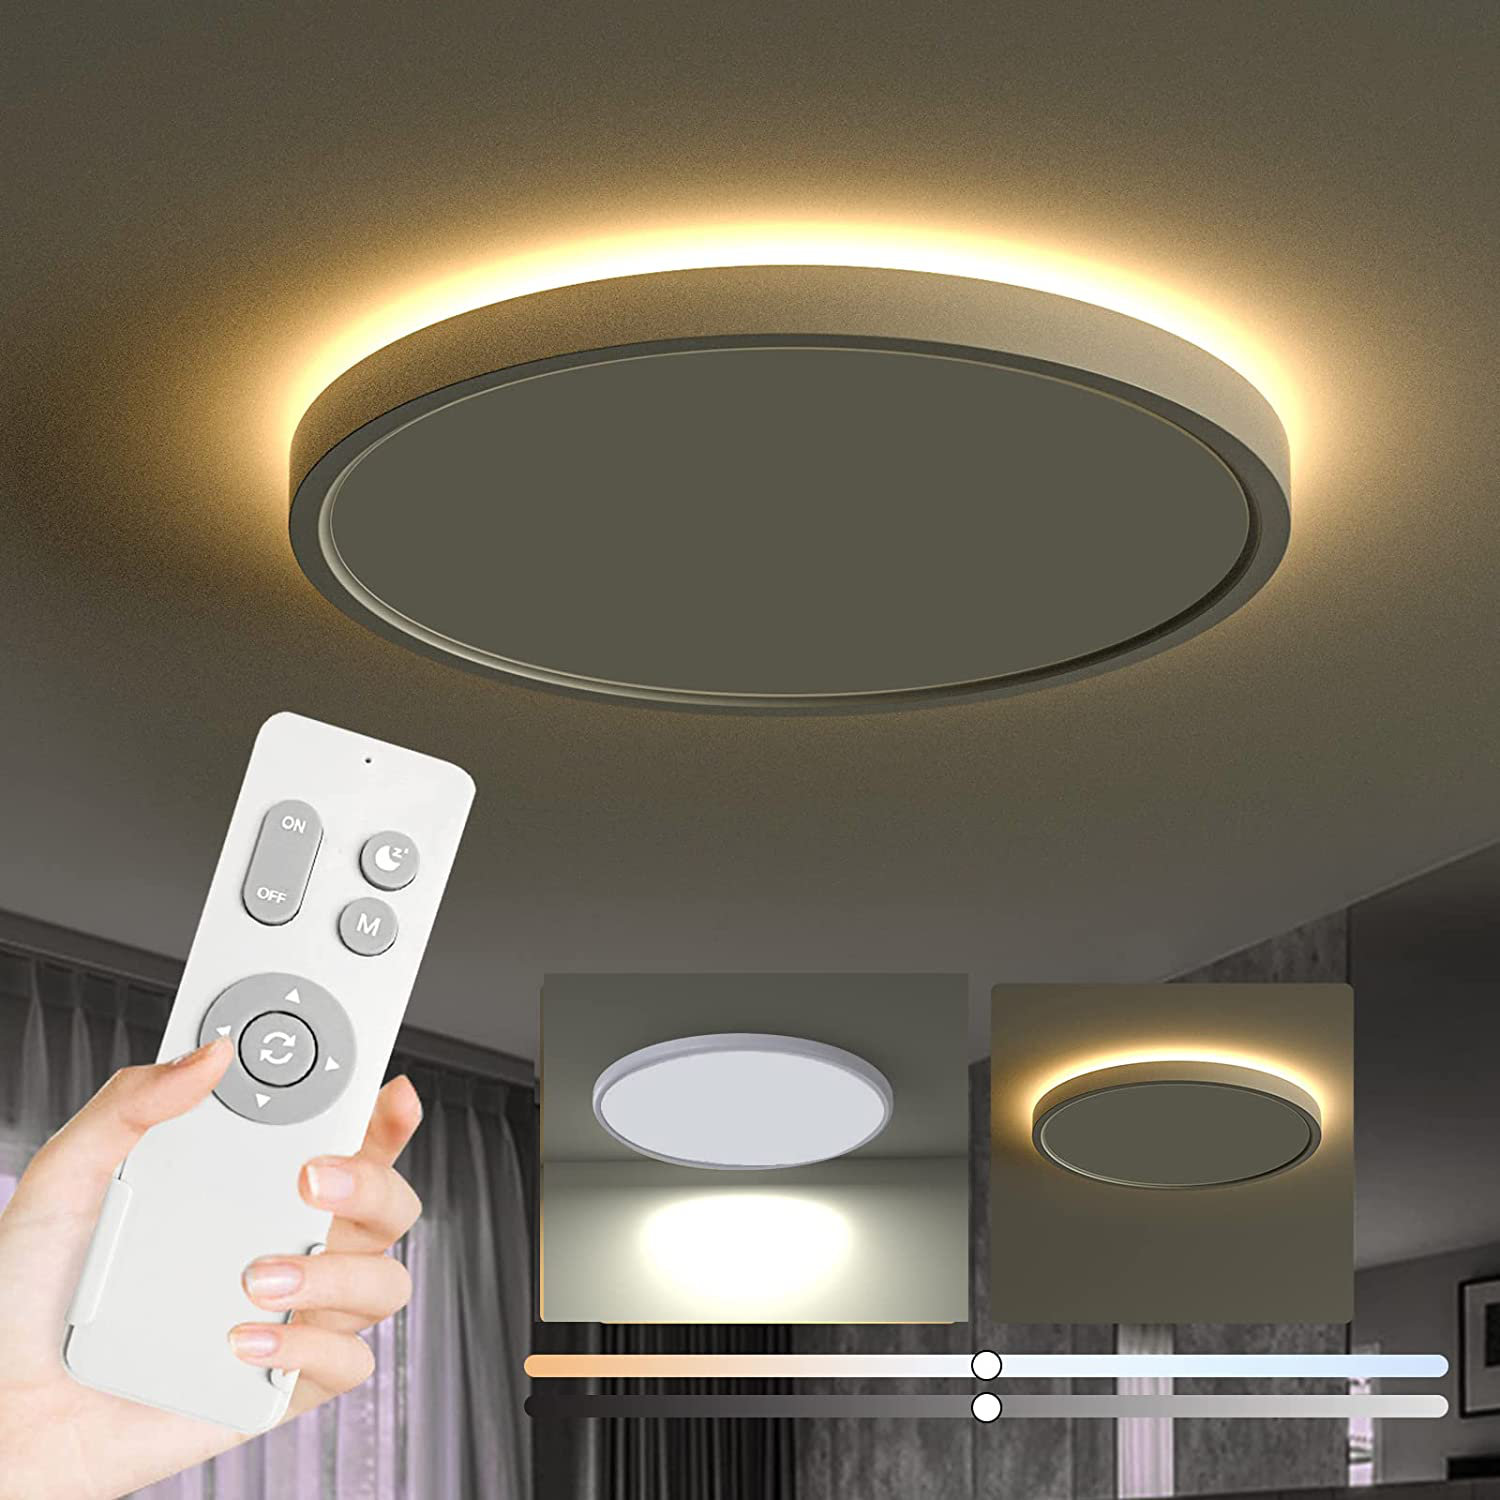 Bell + Howell Wireless Motion Activated Ceiling Light with Remote Control &  Reviews